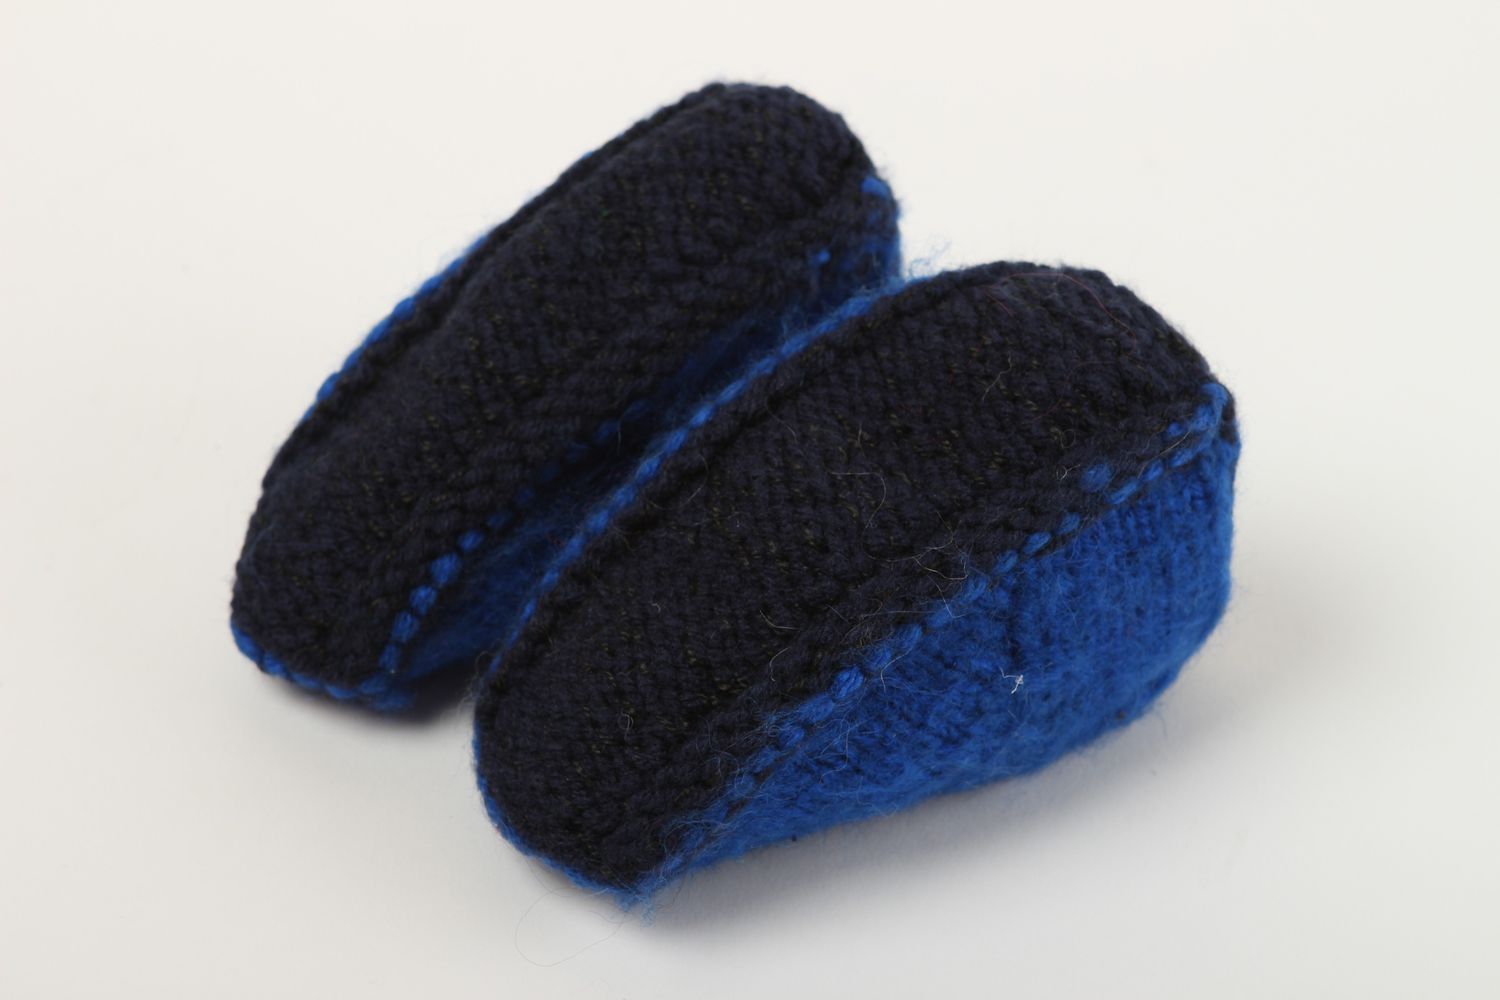 Handmade knitted slippers home goods knitting ideas accessories for kids photo 4